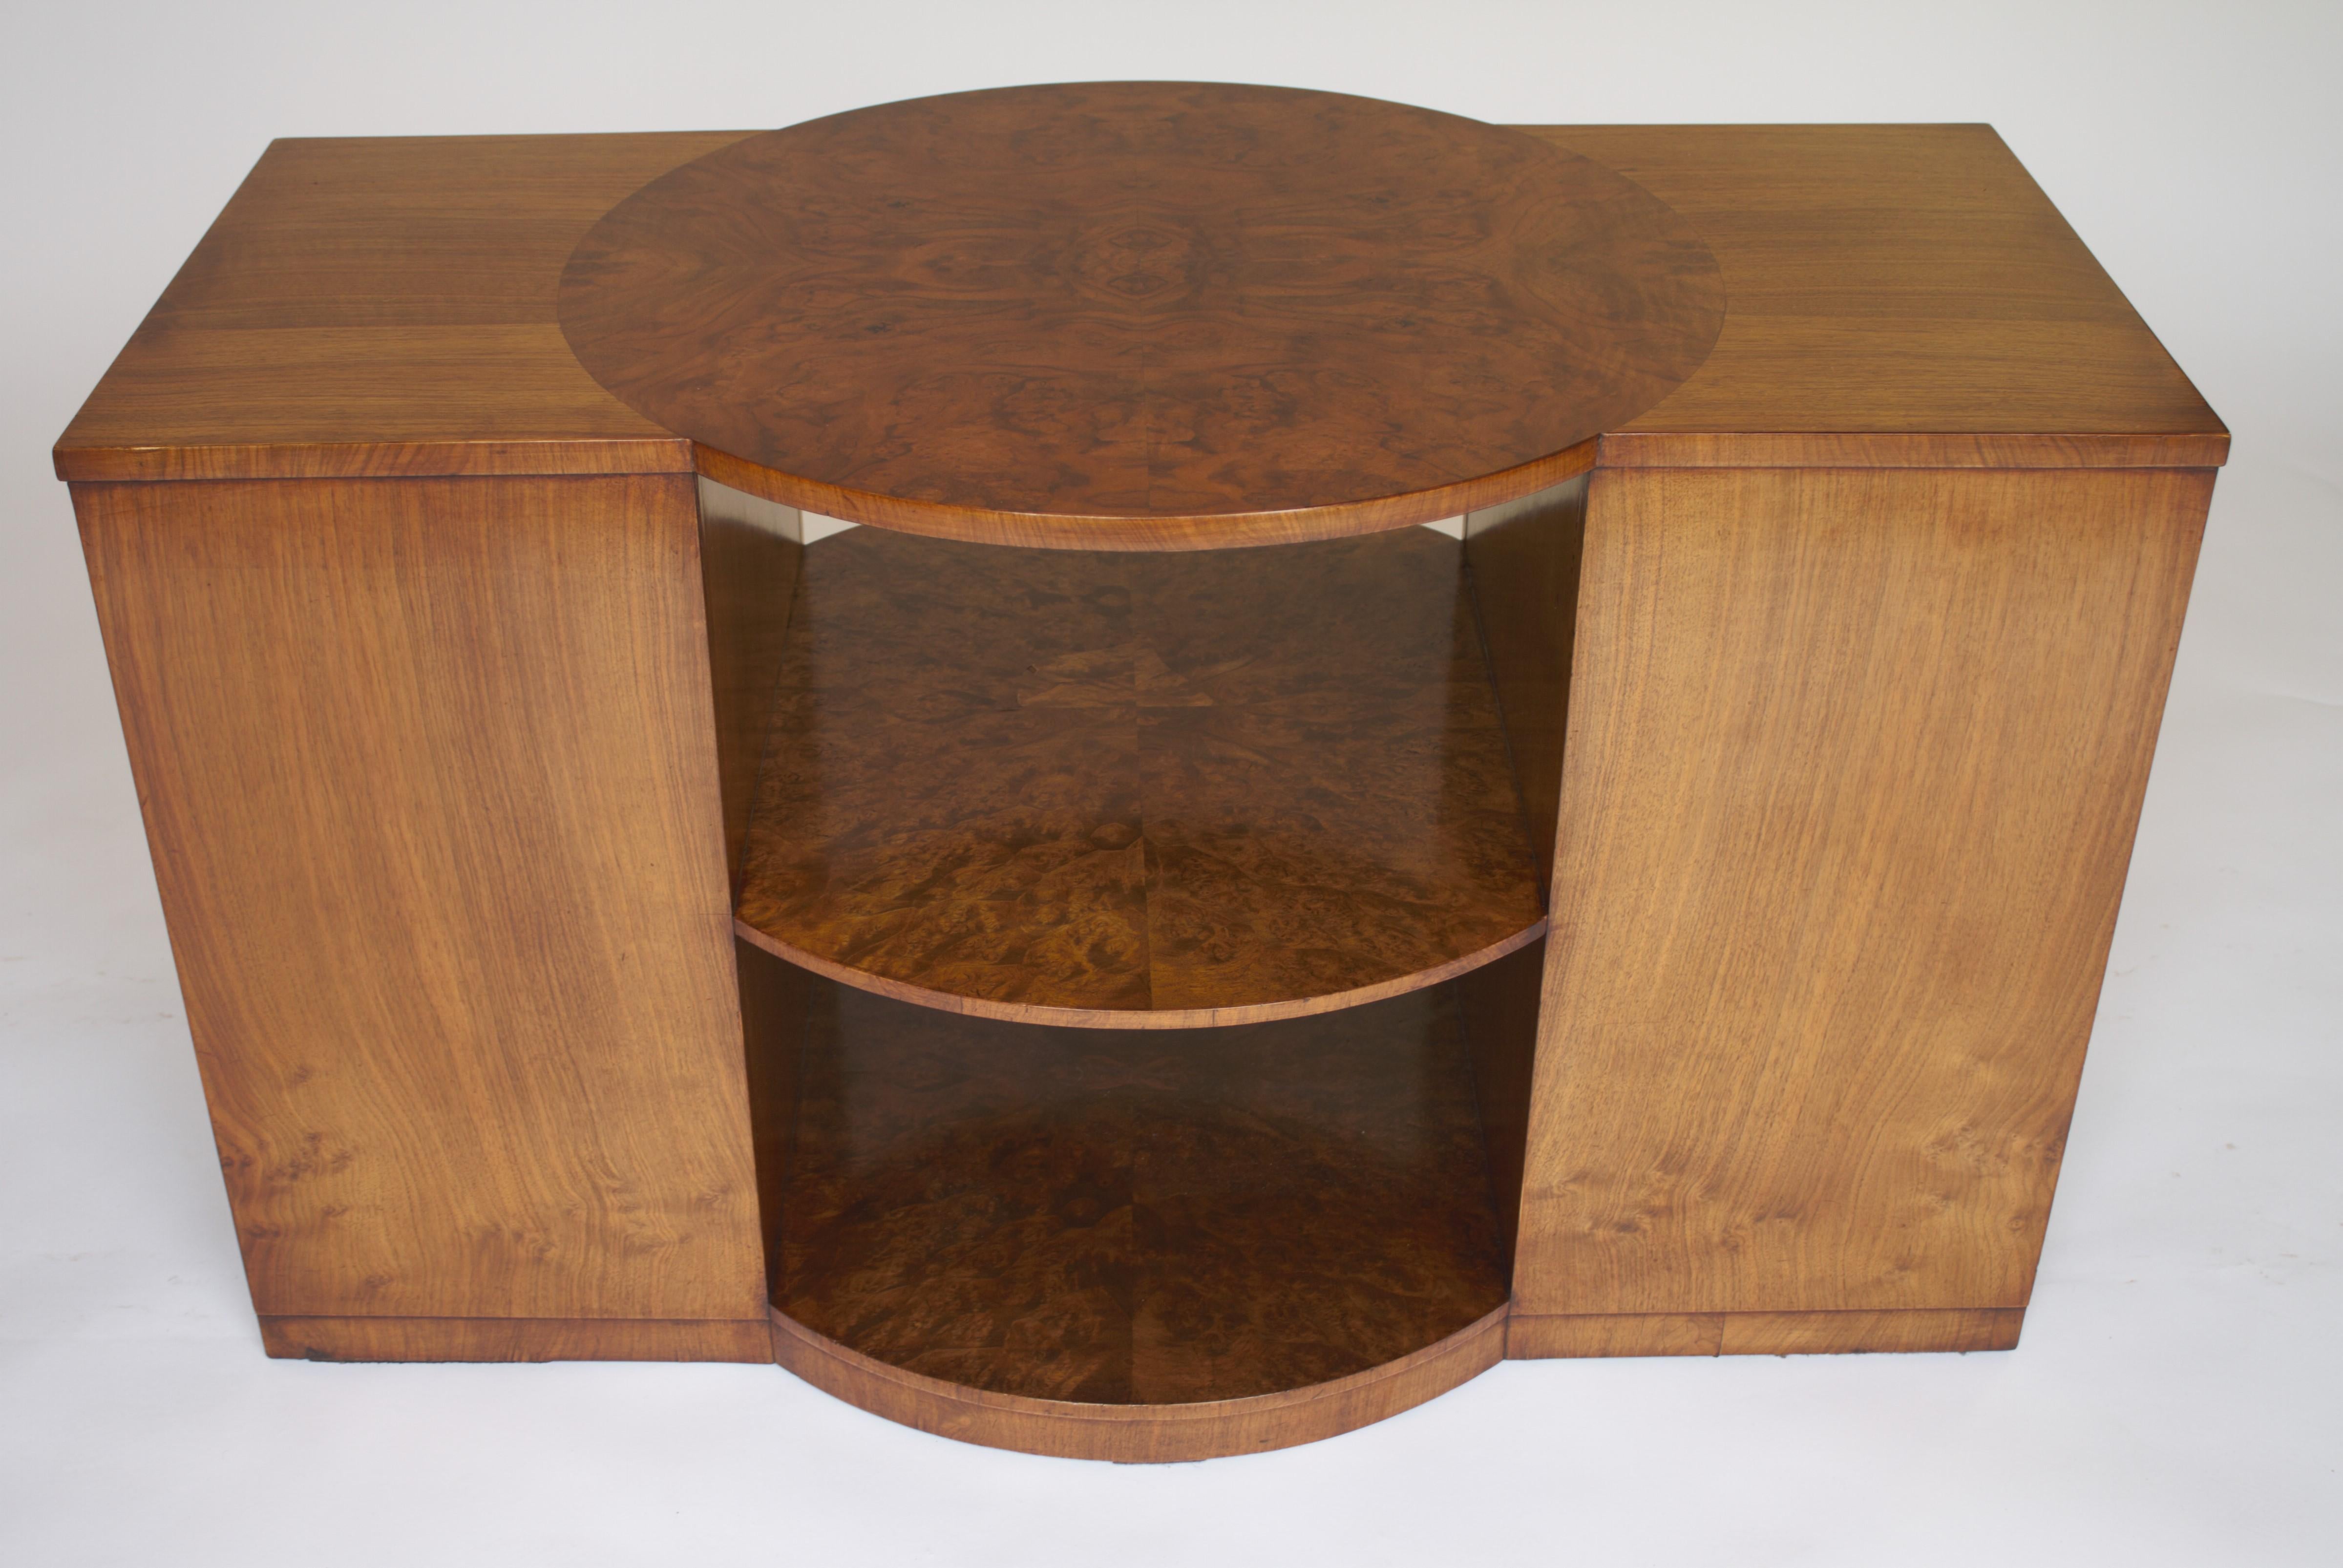 British Art Deco Burr  Walnut Coffee table / Nests 3 tables each side, circa 1920s For Sale